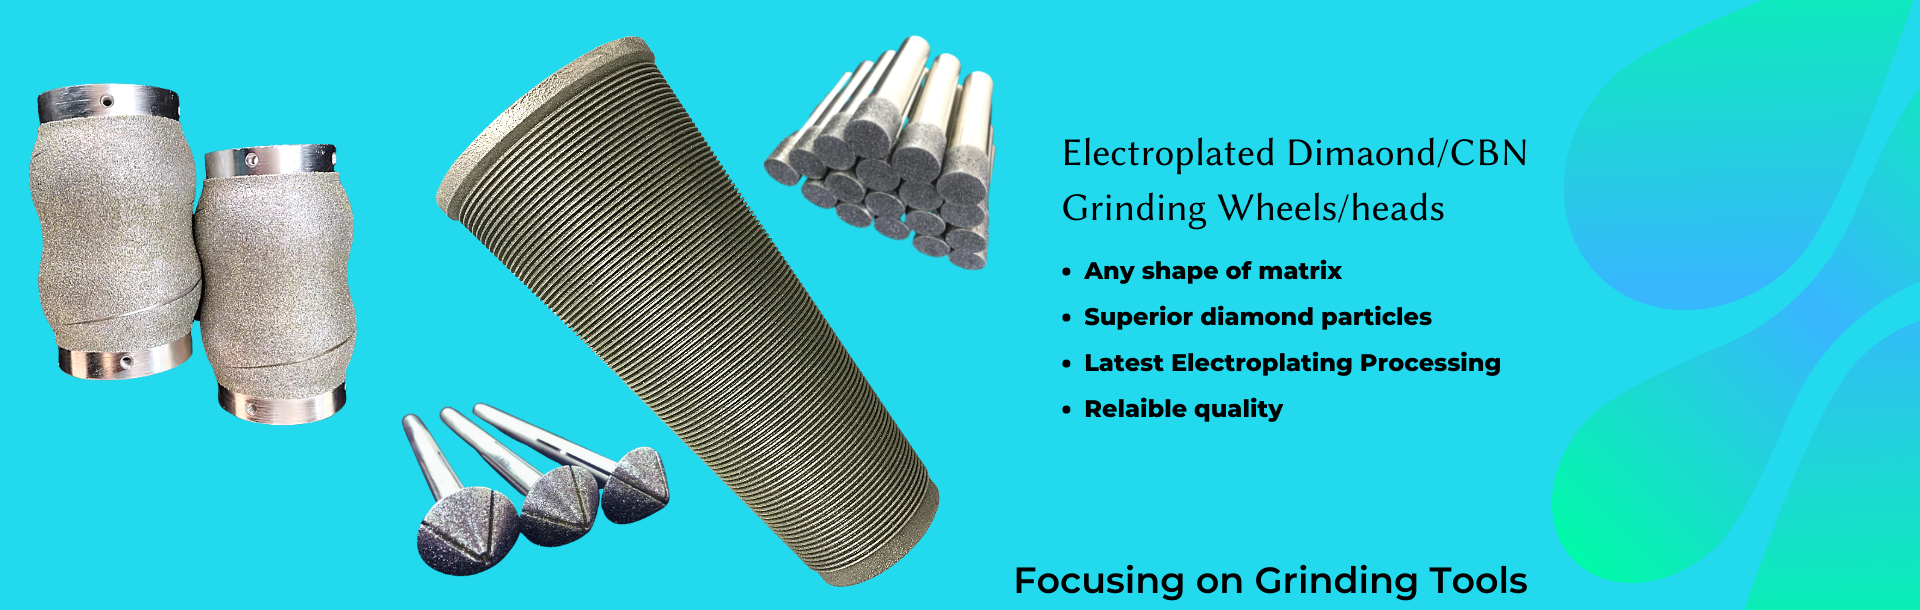 Electroplated DimaondCBN Grinding Wheelsheads